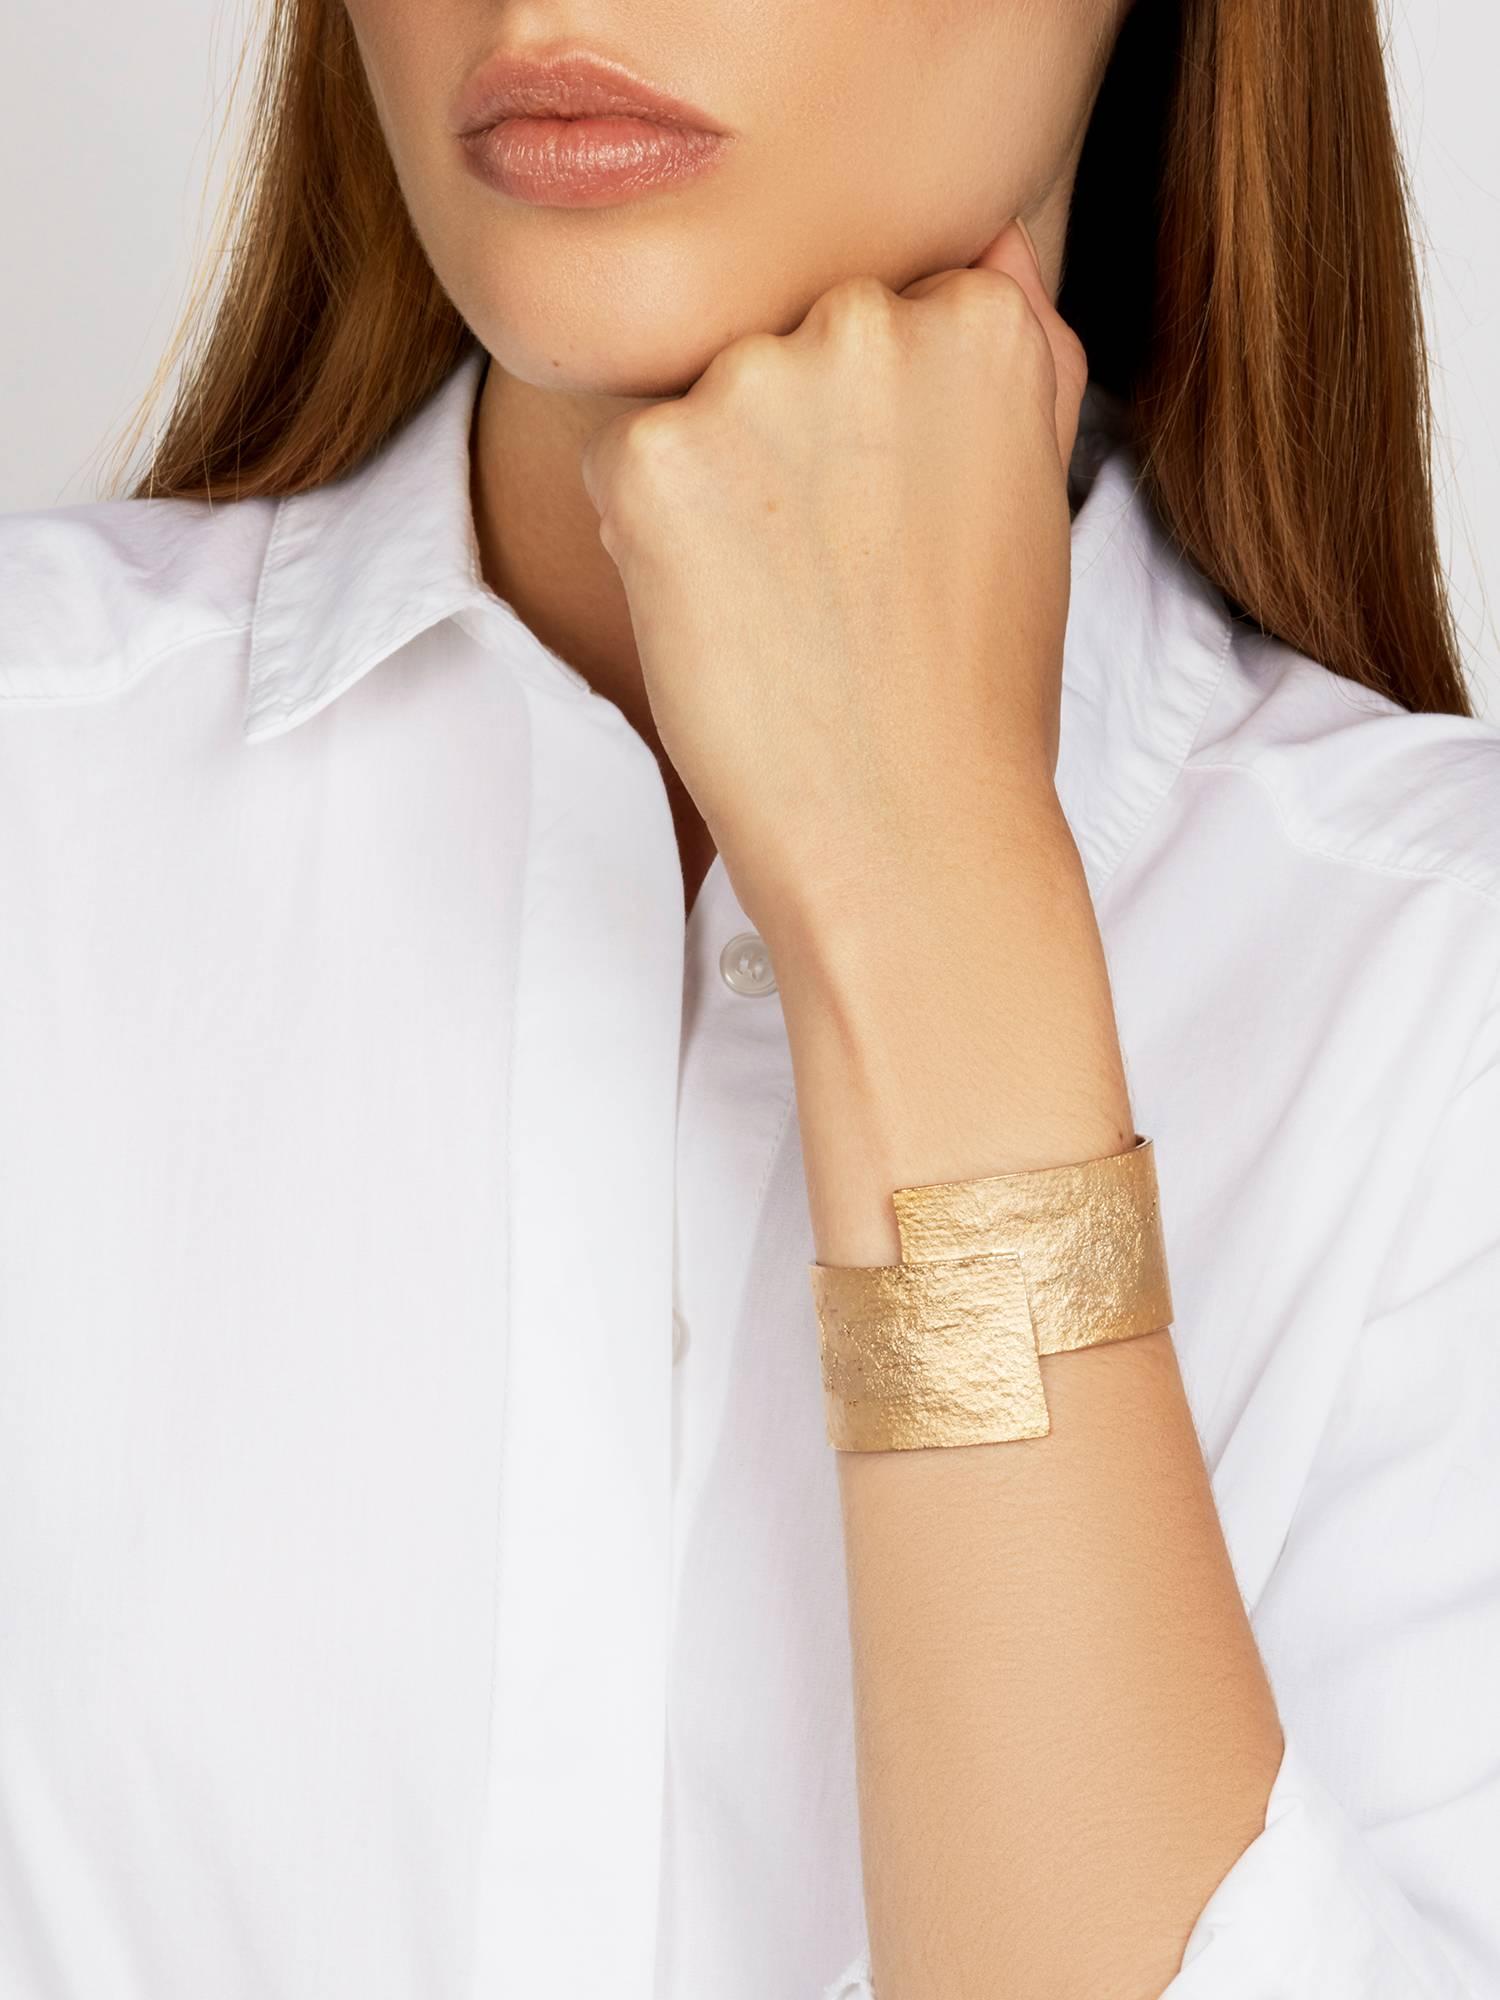 Crafted in solid, glowing bronze, the Abacus Cuff is a subtle statement piece for every day. The unique texture and layered detail add interest to this classic wide cuff. 

Every piece in this collection is individually hand-crafted in paper and